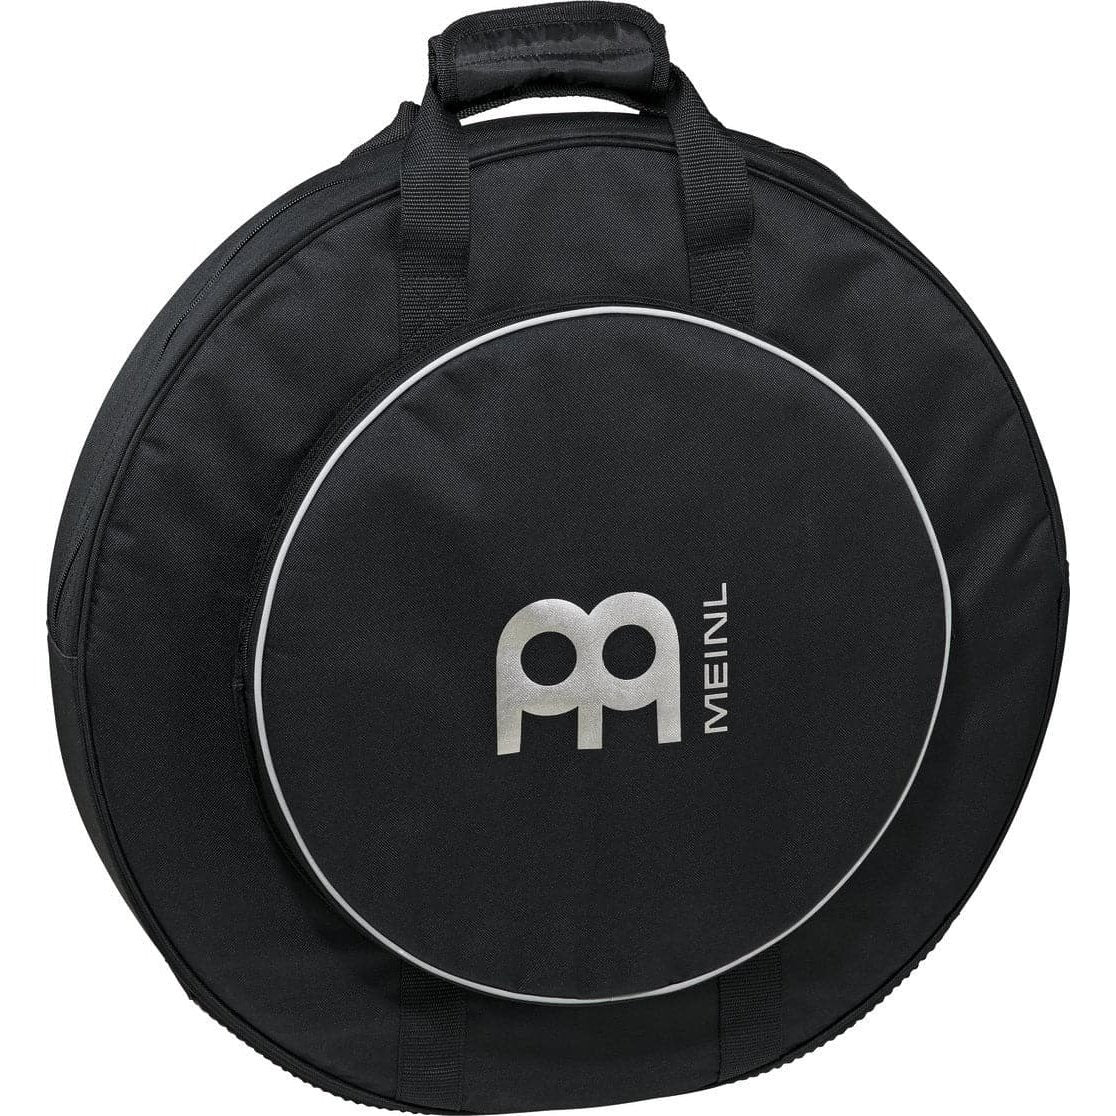 Meinl Professional Cymbal Backpack 22 Black